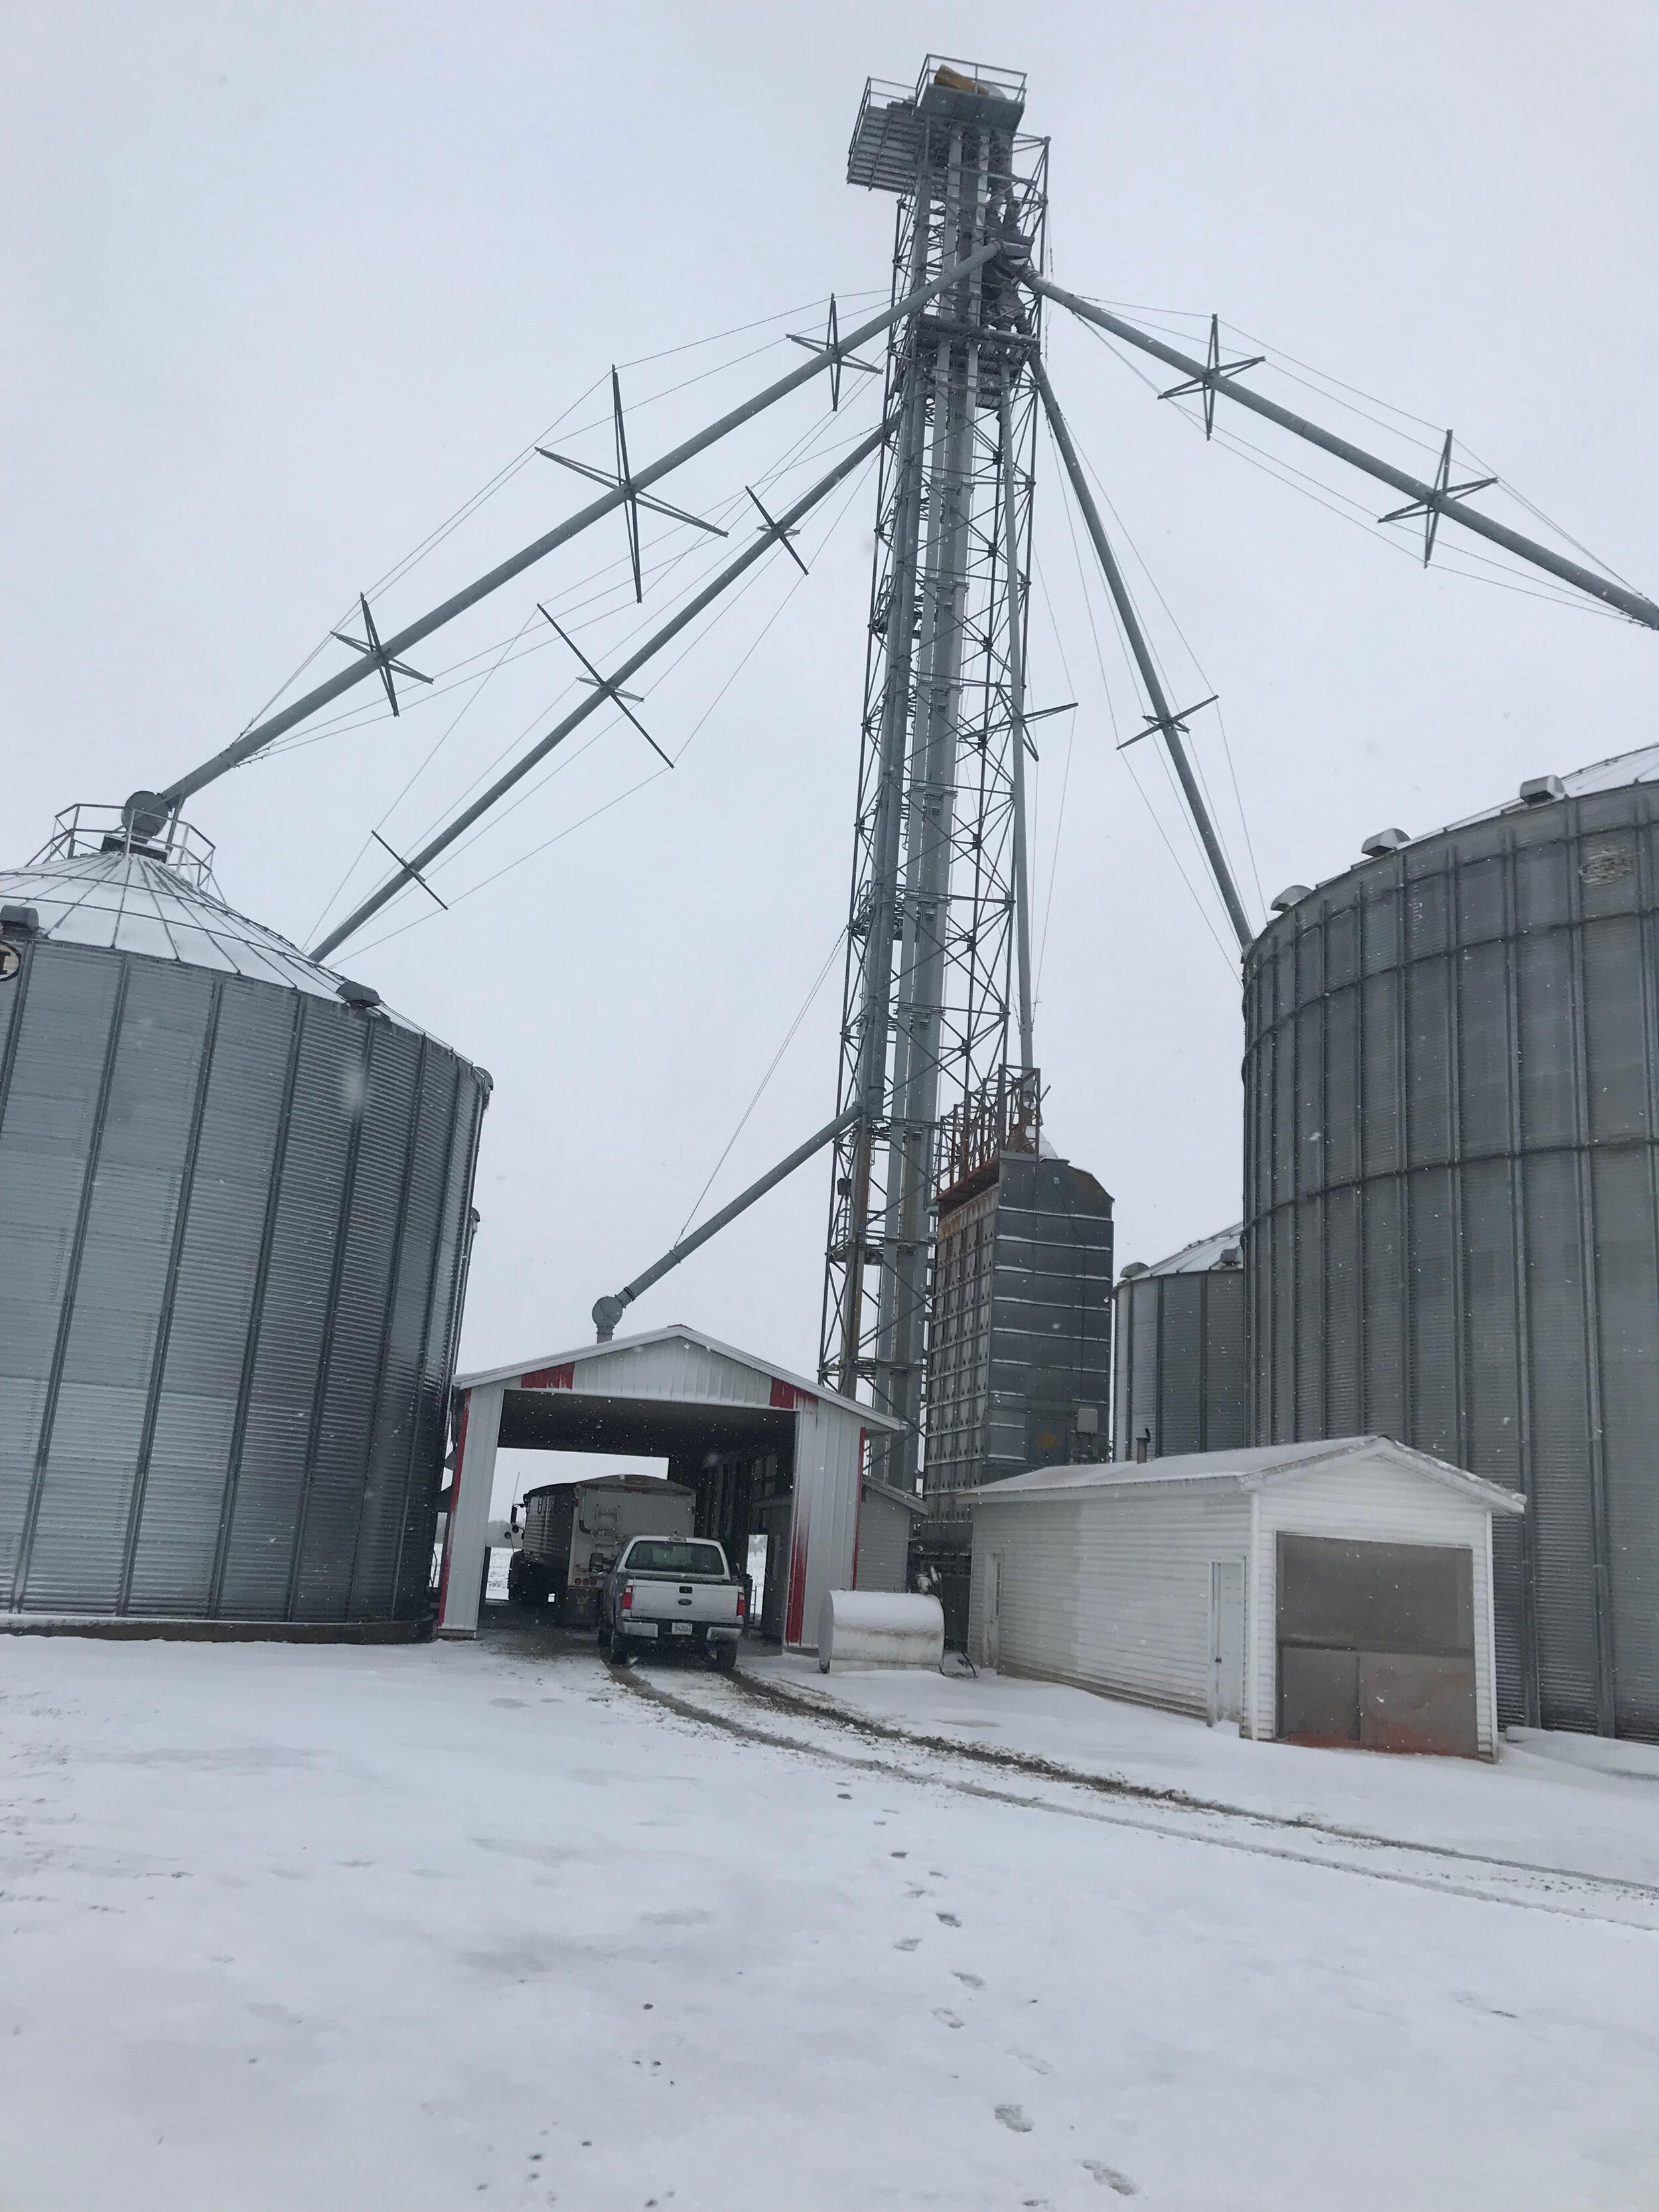 Drying corn in the snowstorm